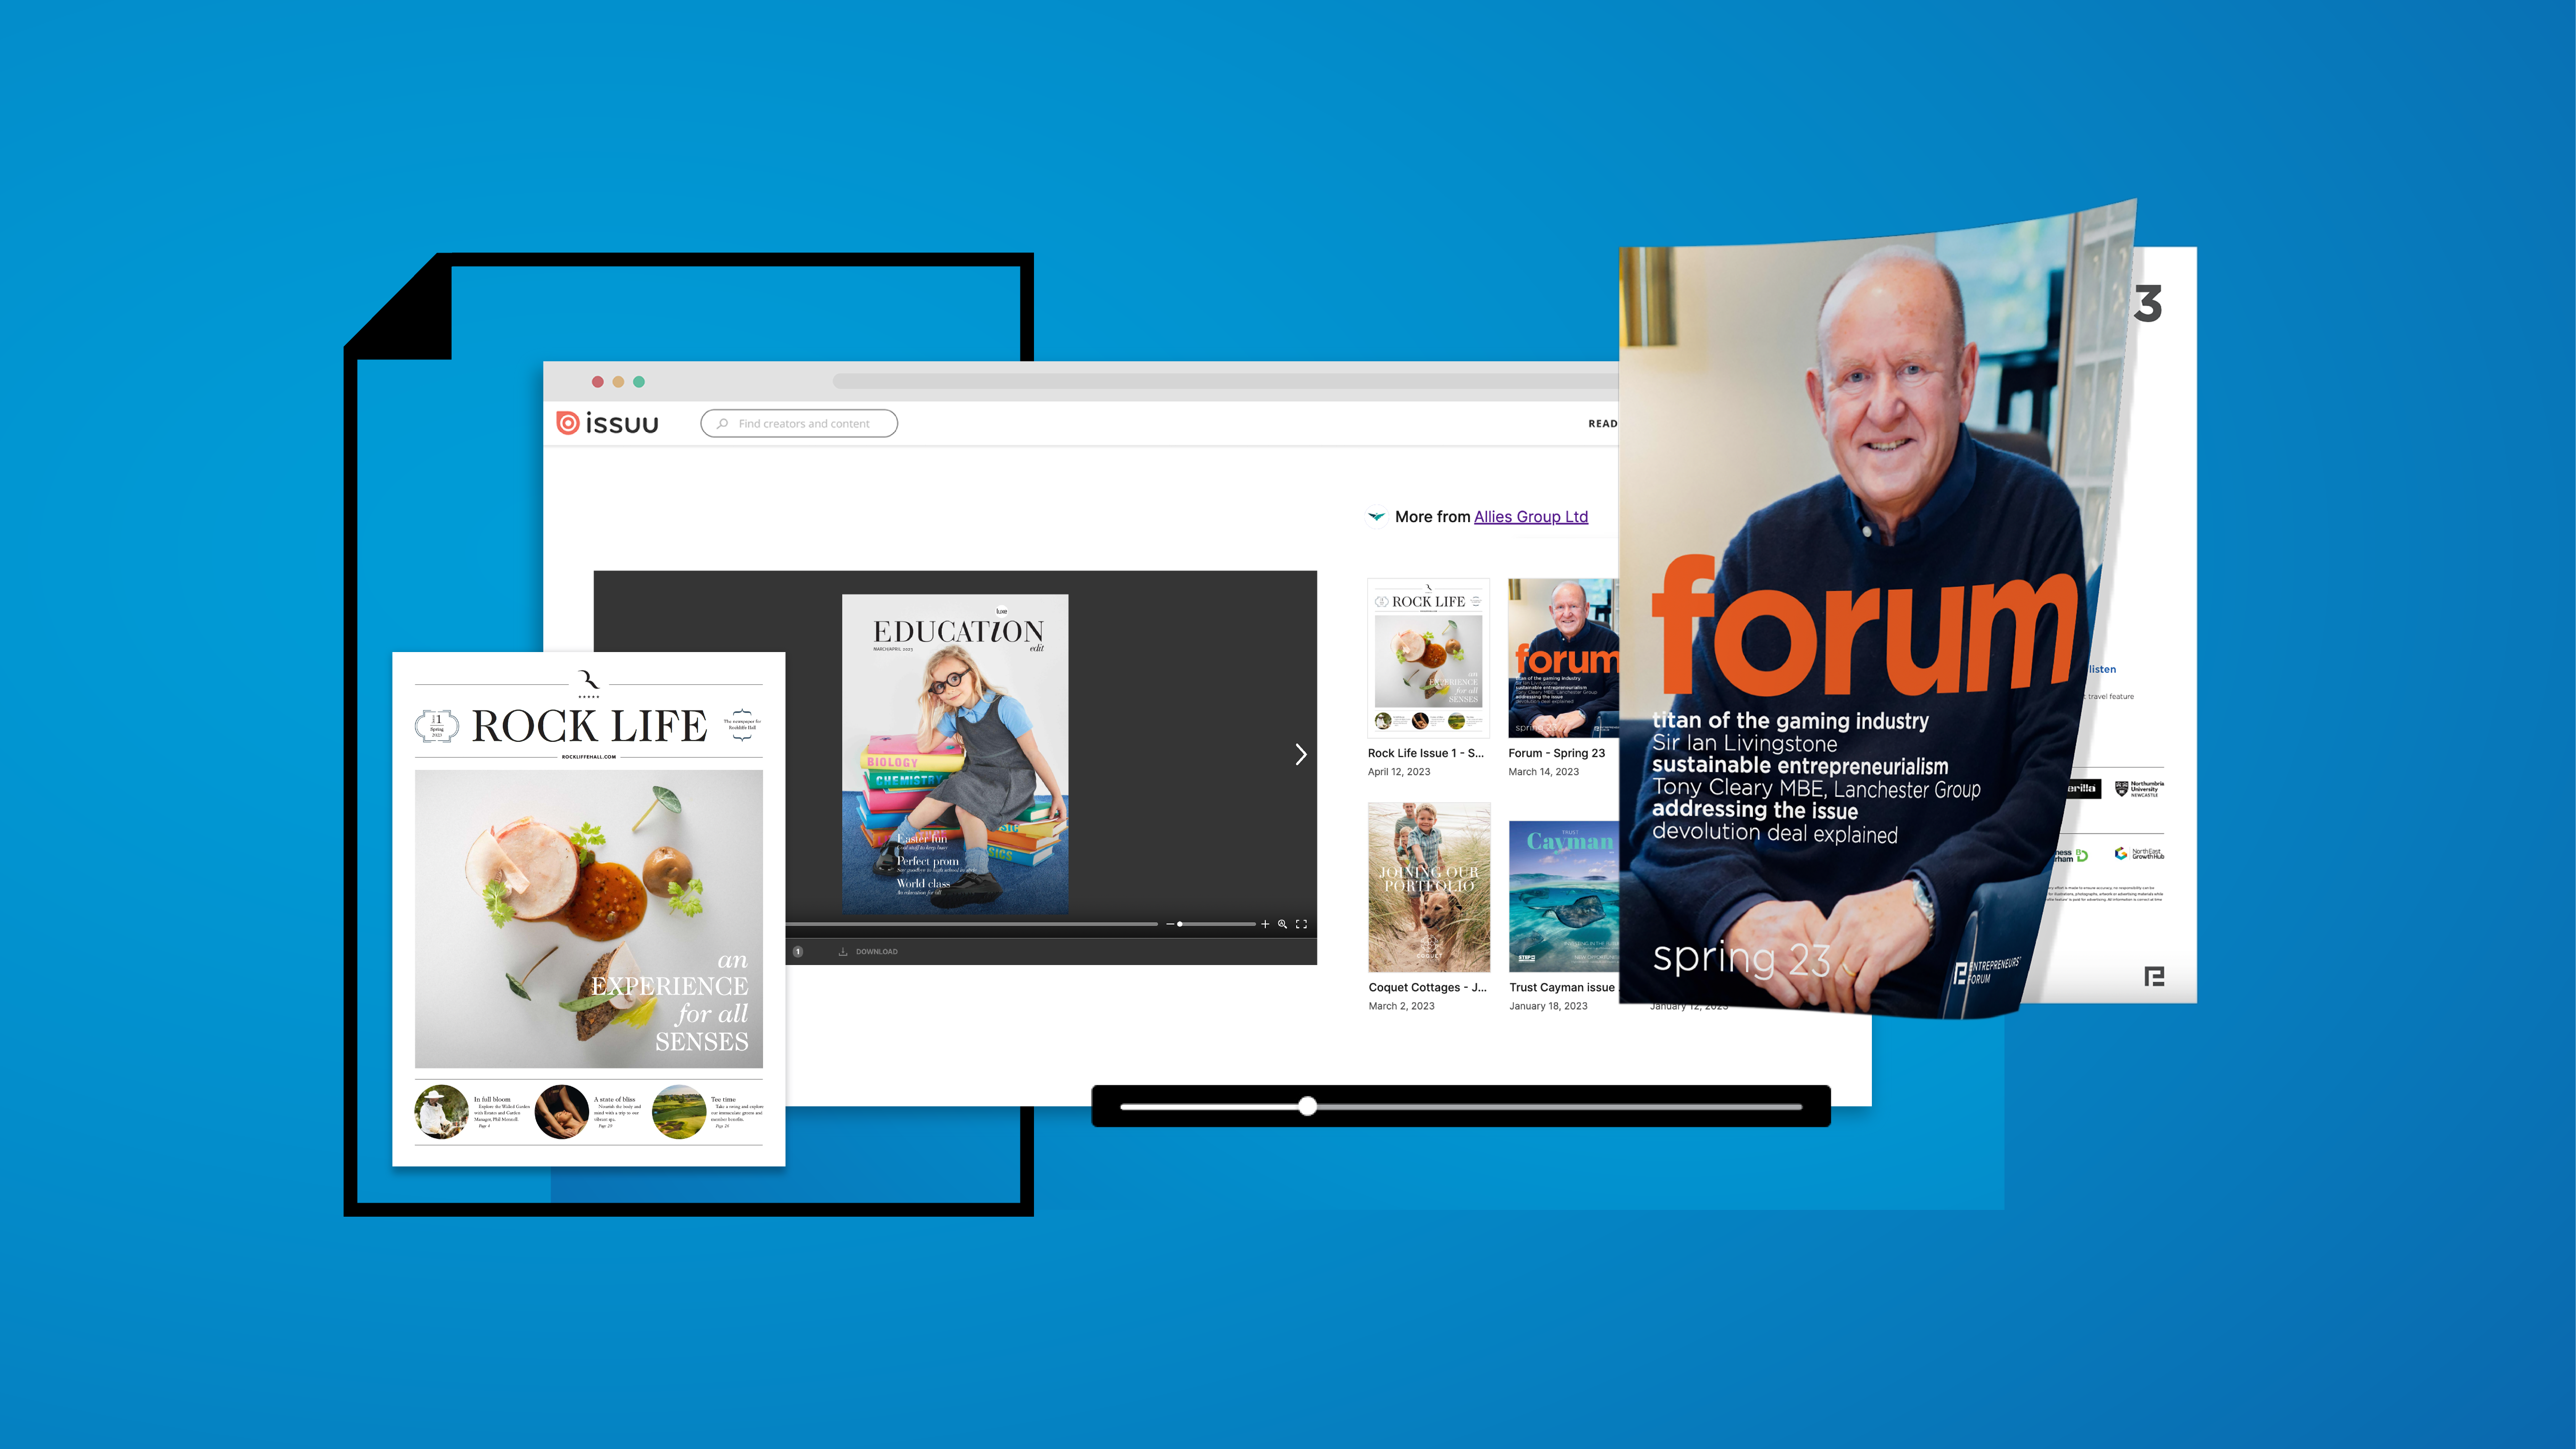 Issuu platform elements mixed with Allies Group publications featuring business men and lifestyle objects